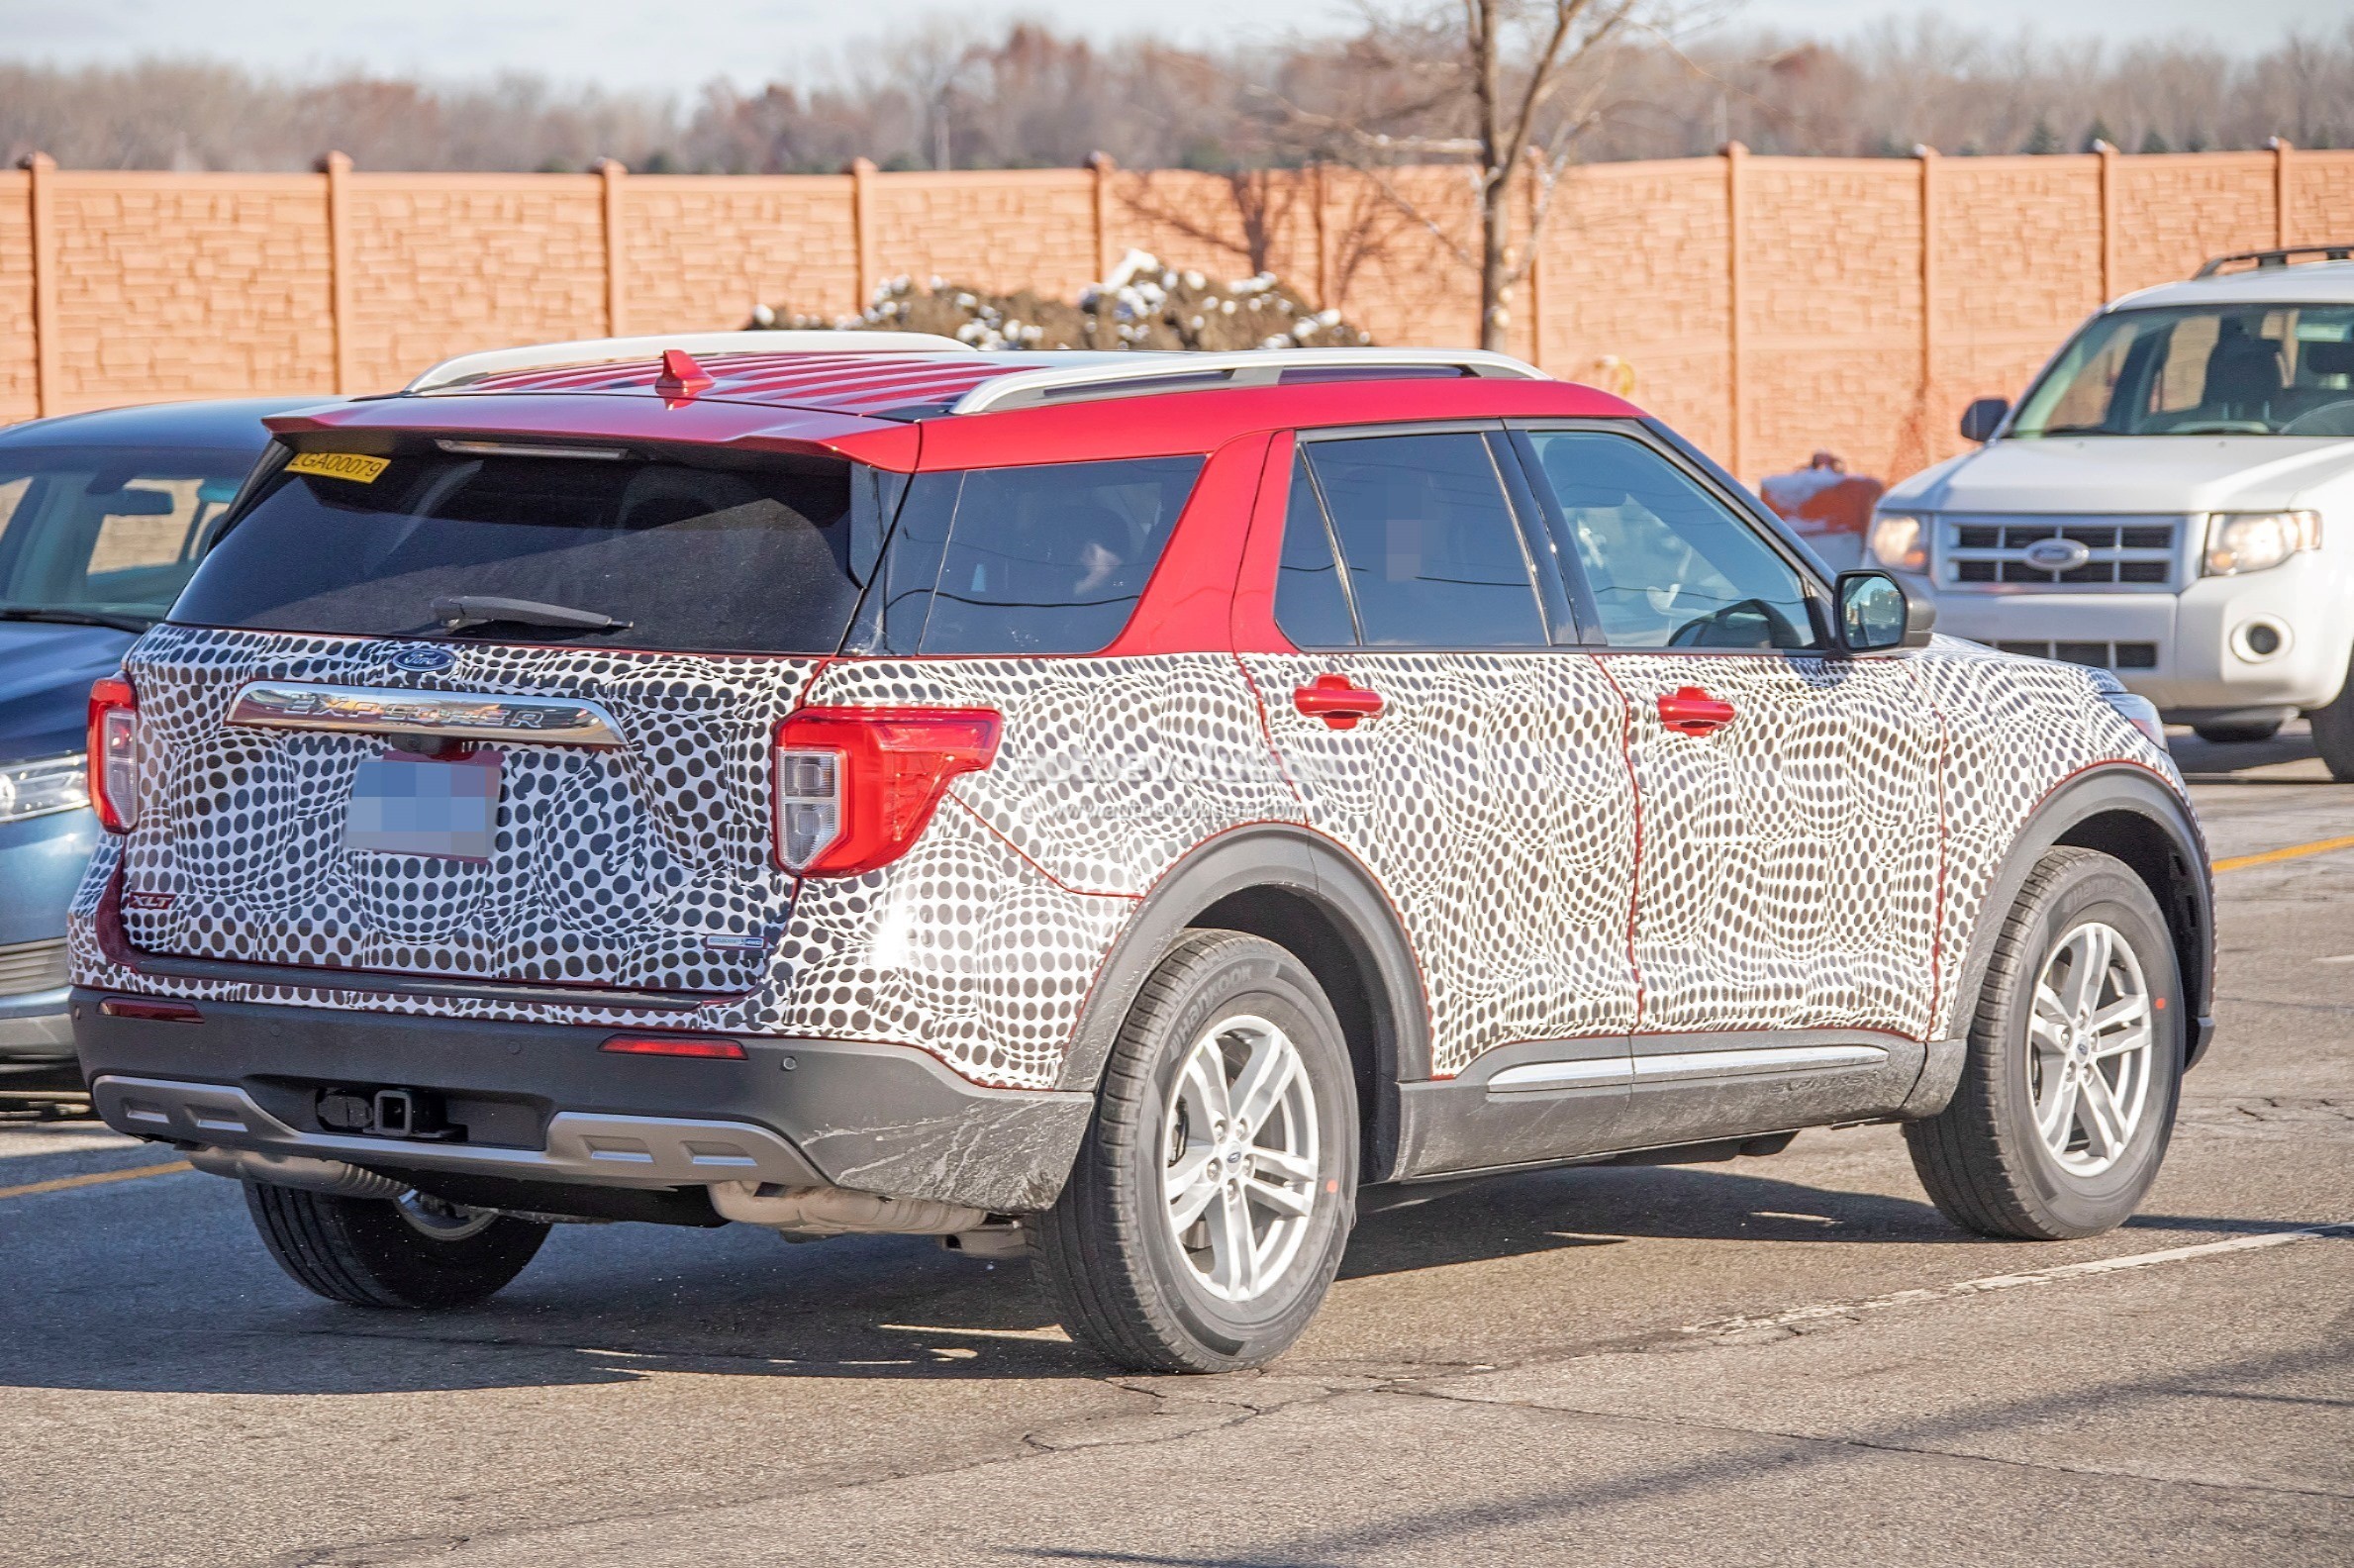 49 Best Pictures 2020 Ford Explorer Sport Horsepower : 9 Little Known Facts About The 2020 Ford Explorer | Top Speed